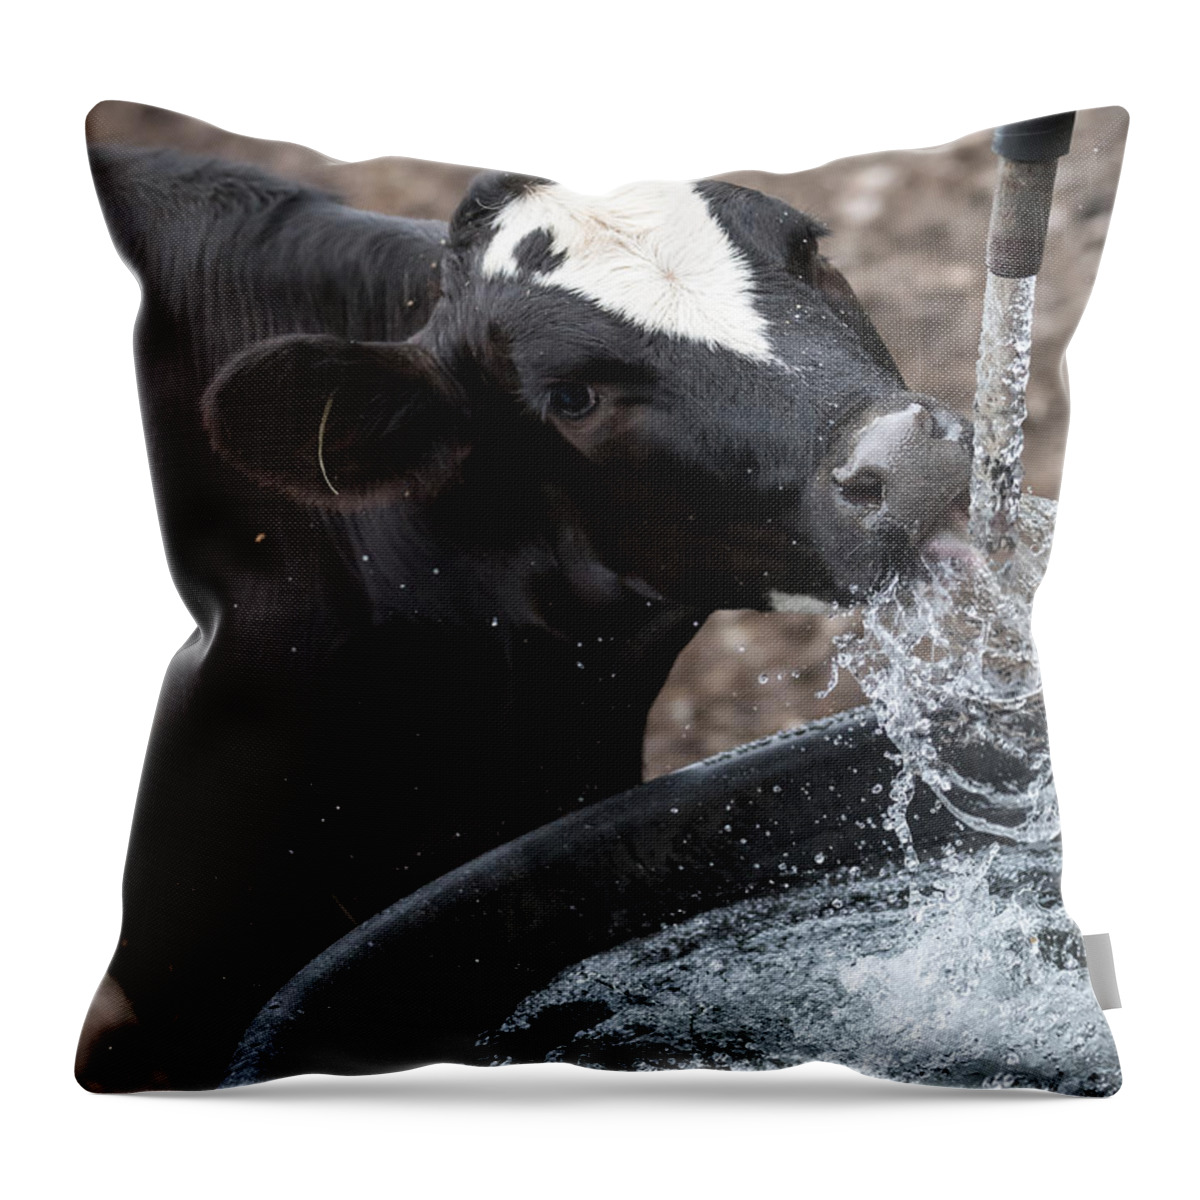 Cow Throw Pillow featuring the photograph Thirsty Cow by Holden The Moment